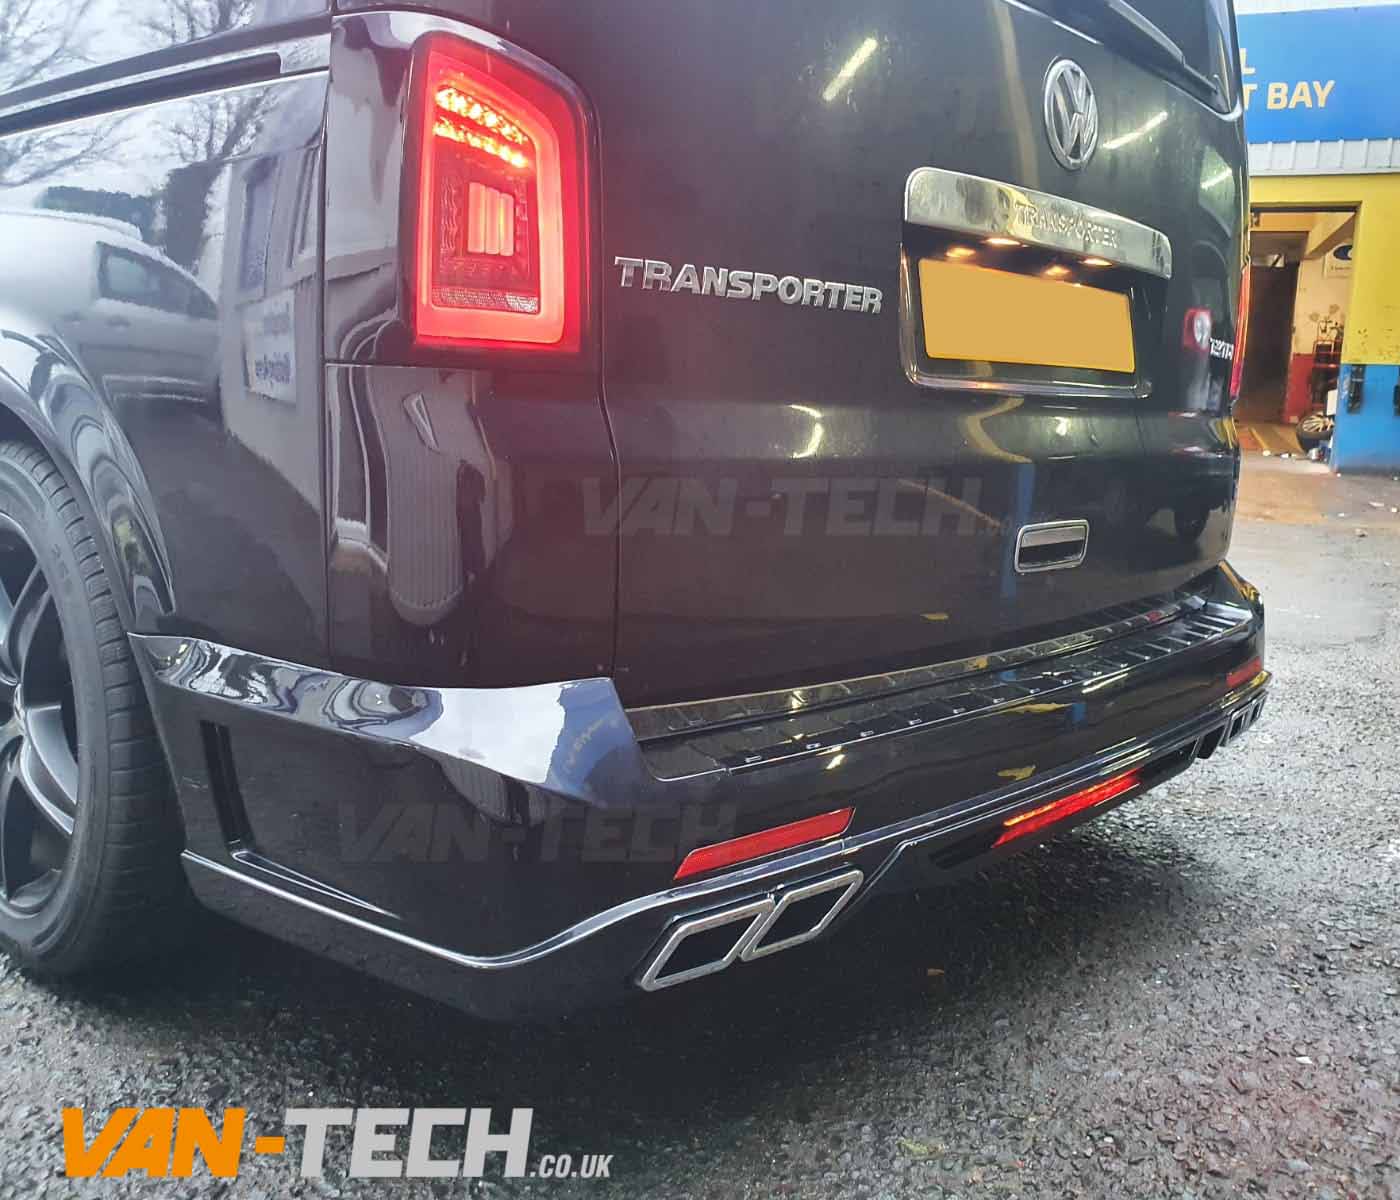 Van-Tech on Twitter: "NOW BACK IN STOCK SPECIAL OFFER PRICE VW Transporter T5 T5.1 Rear Tailgate Bumper Styling Kit USUAL £350 NOW £330!! Van-Tech Supply and fit accessories for VW Transporter